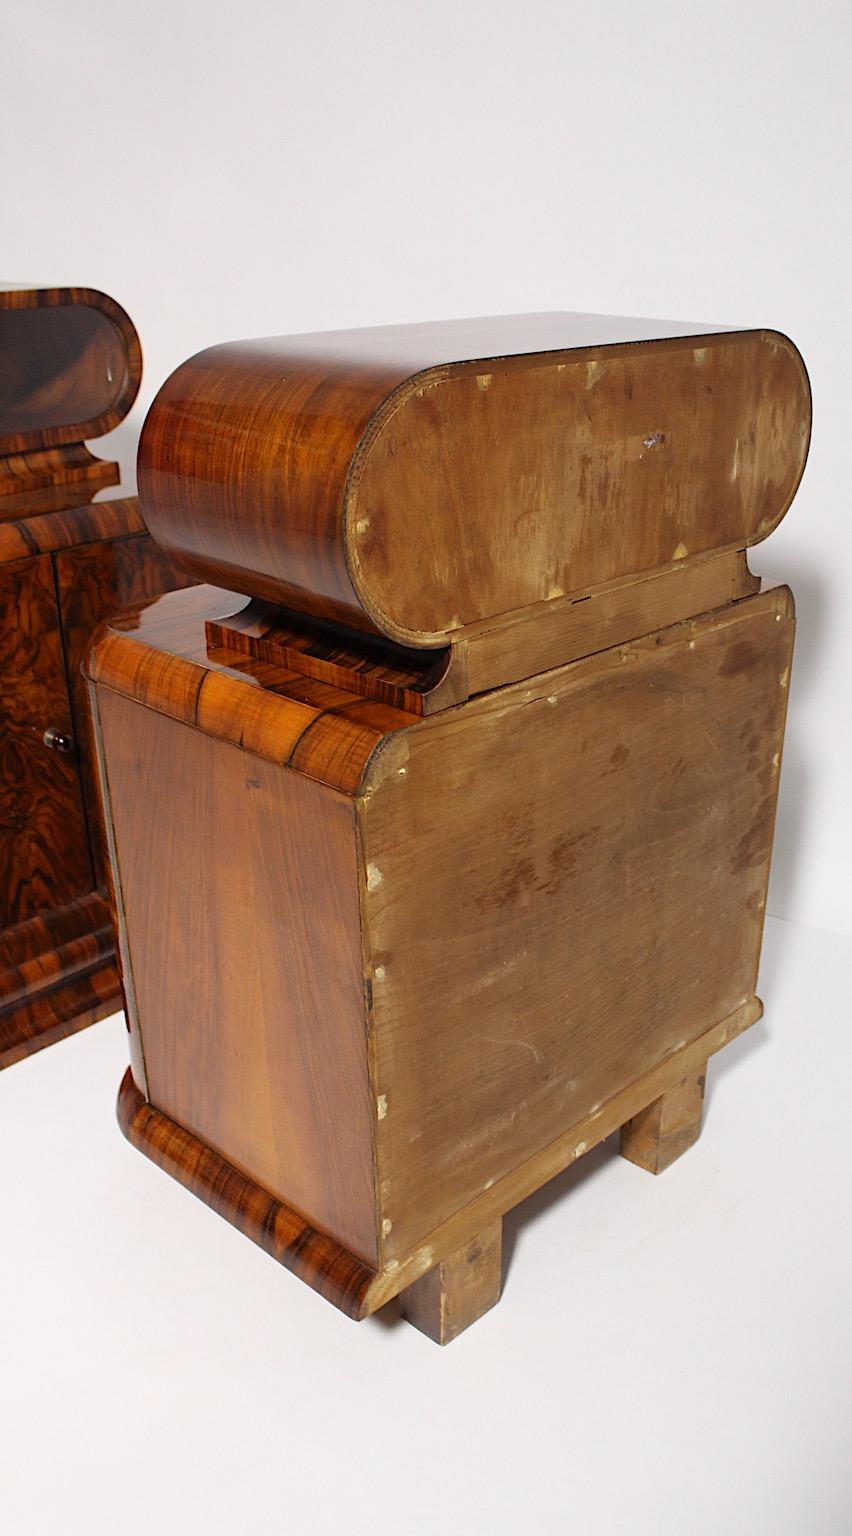 Art Deco Walnut Vintage Pair of Nightstands or Chests or Commodes 1930s Vienna For Sale 12